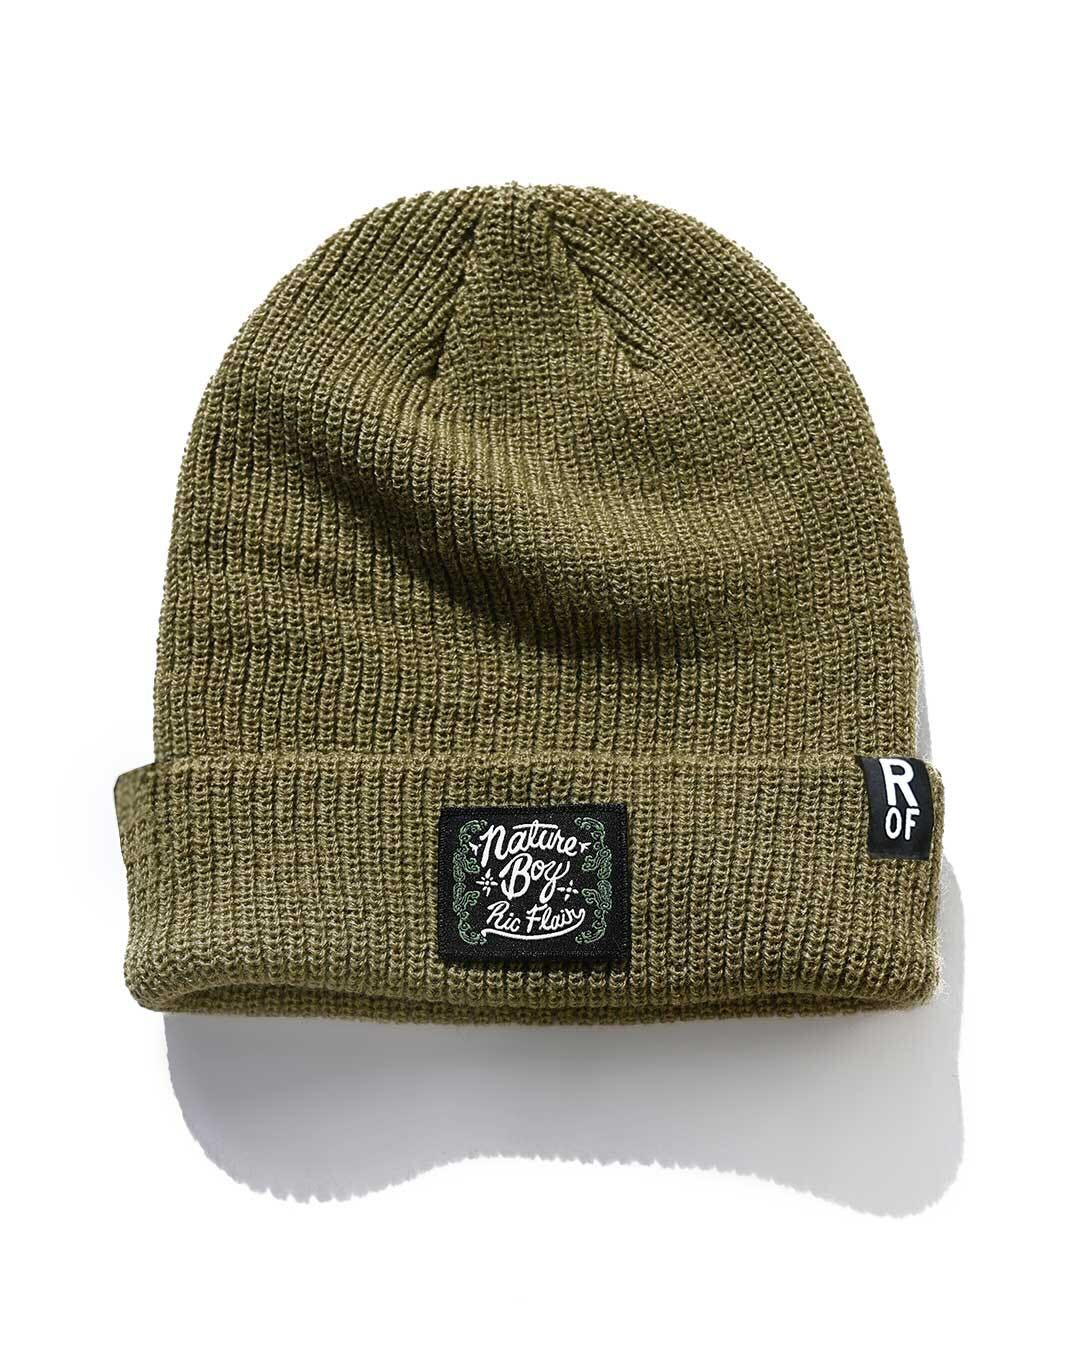 Fight - Roots Nature Flair of Boy Olive Beanie Ric